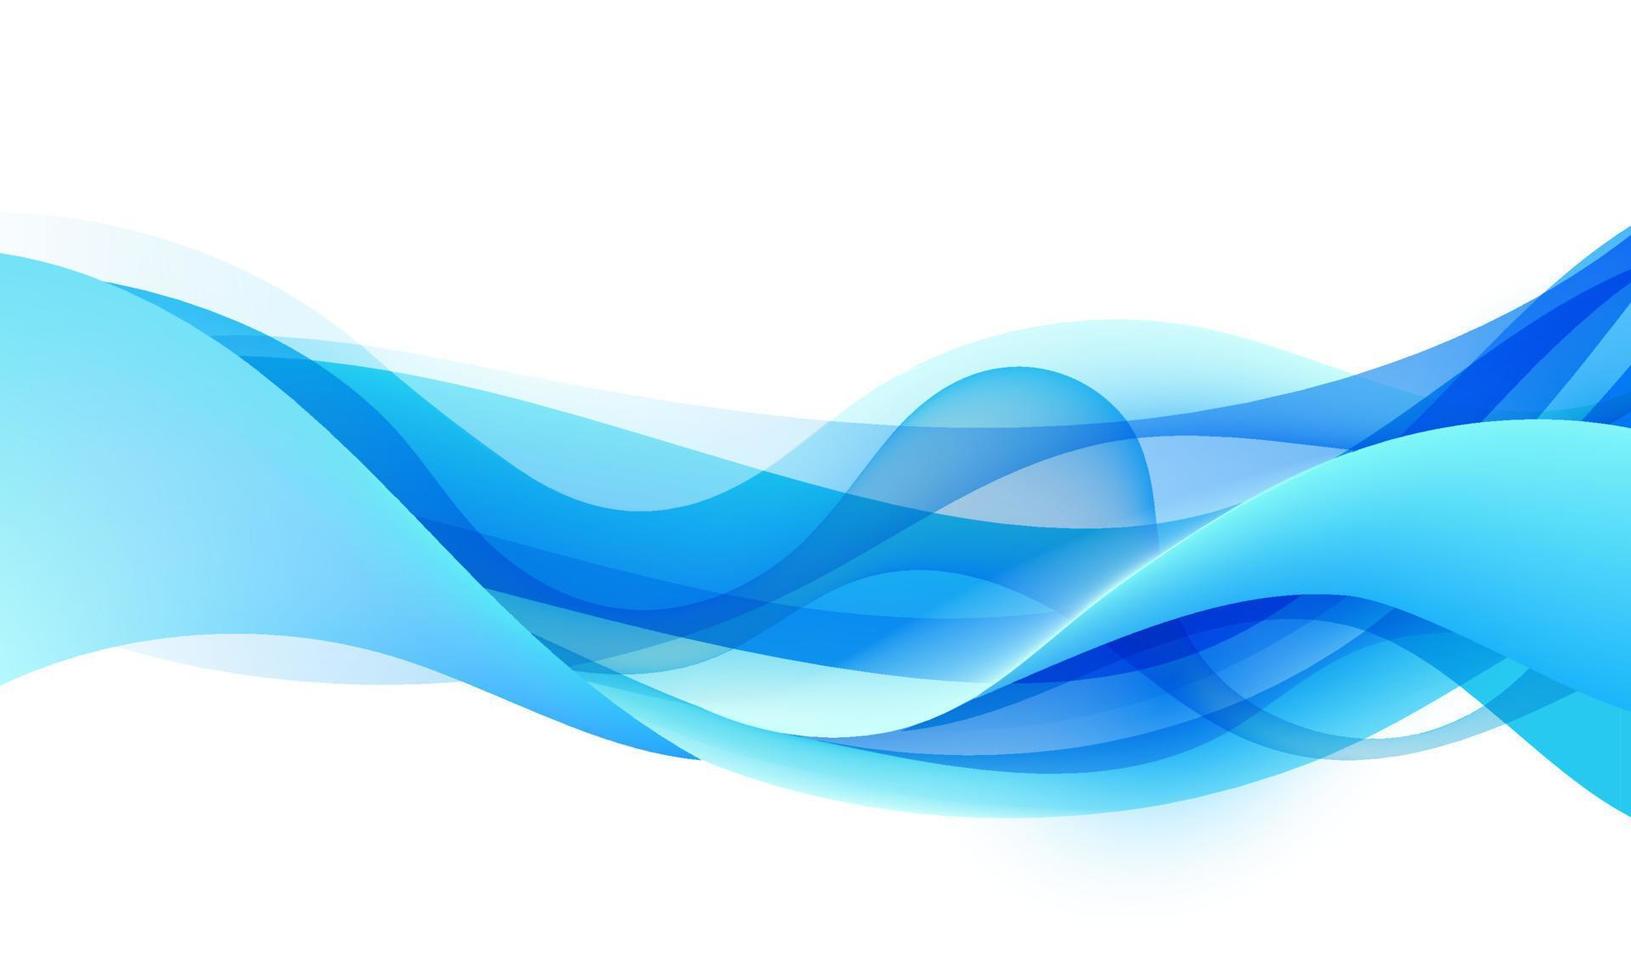 Vector wavy abstract geometric background, blue flow hoizontal banner. Trendy gradient shapes composition.